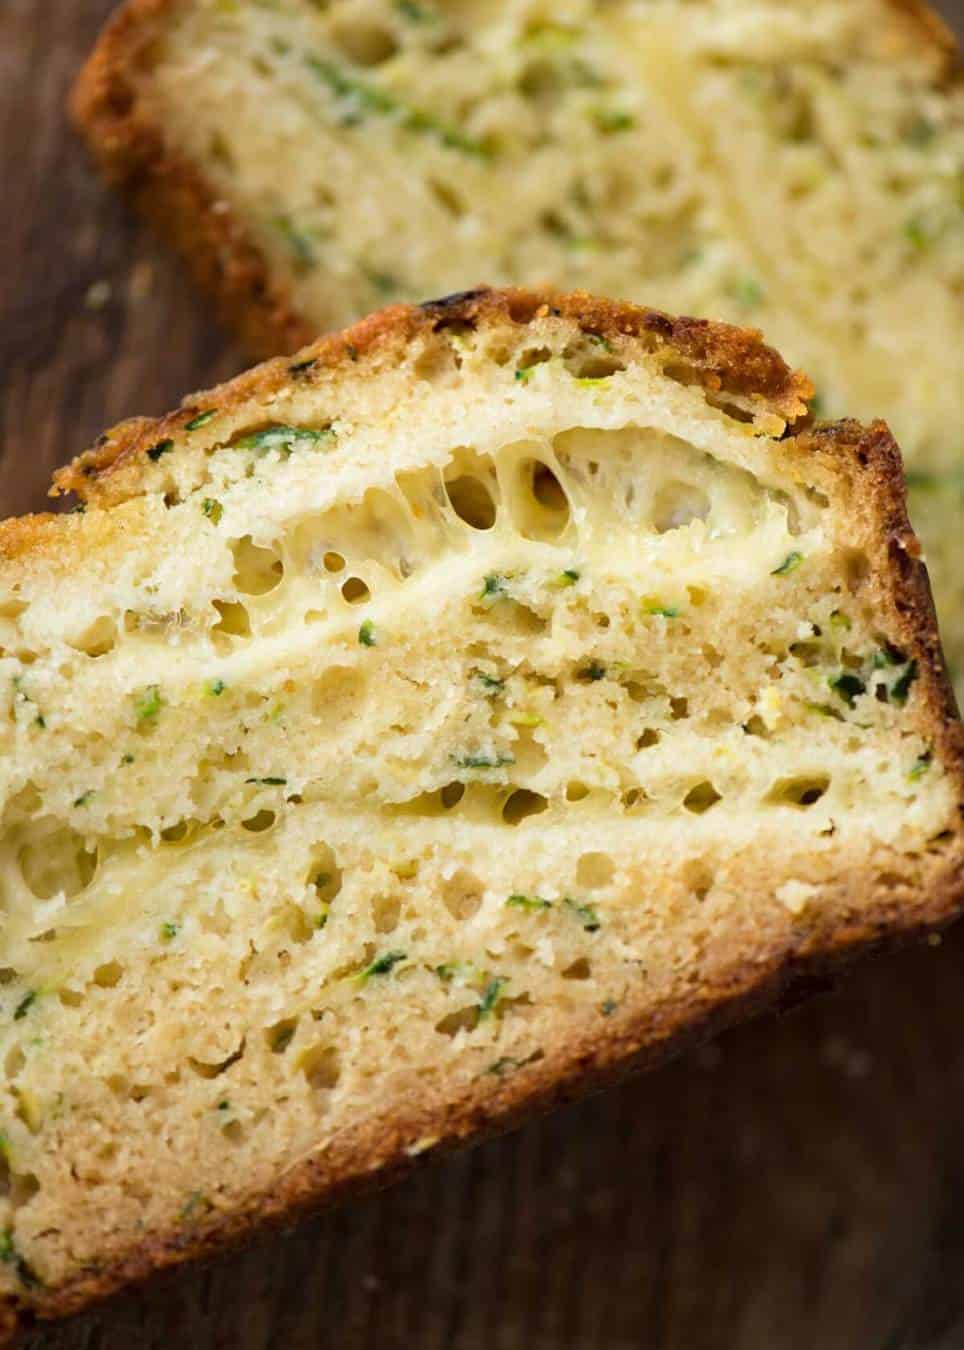 A Cheesy Zucchini Bread that's quick to make (no yeast) and is so moist, you'll scoff it down even without slathering it with butter! www.recipetineats.com